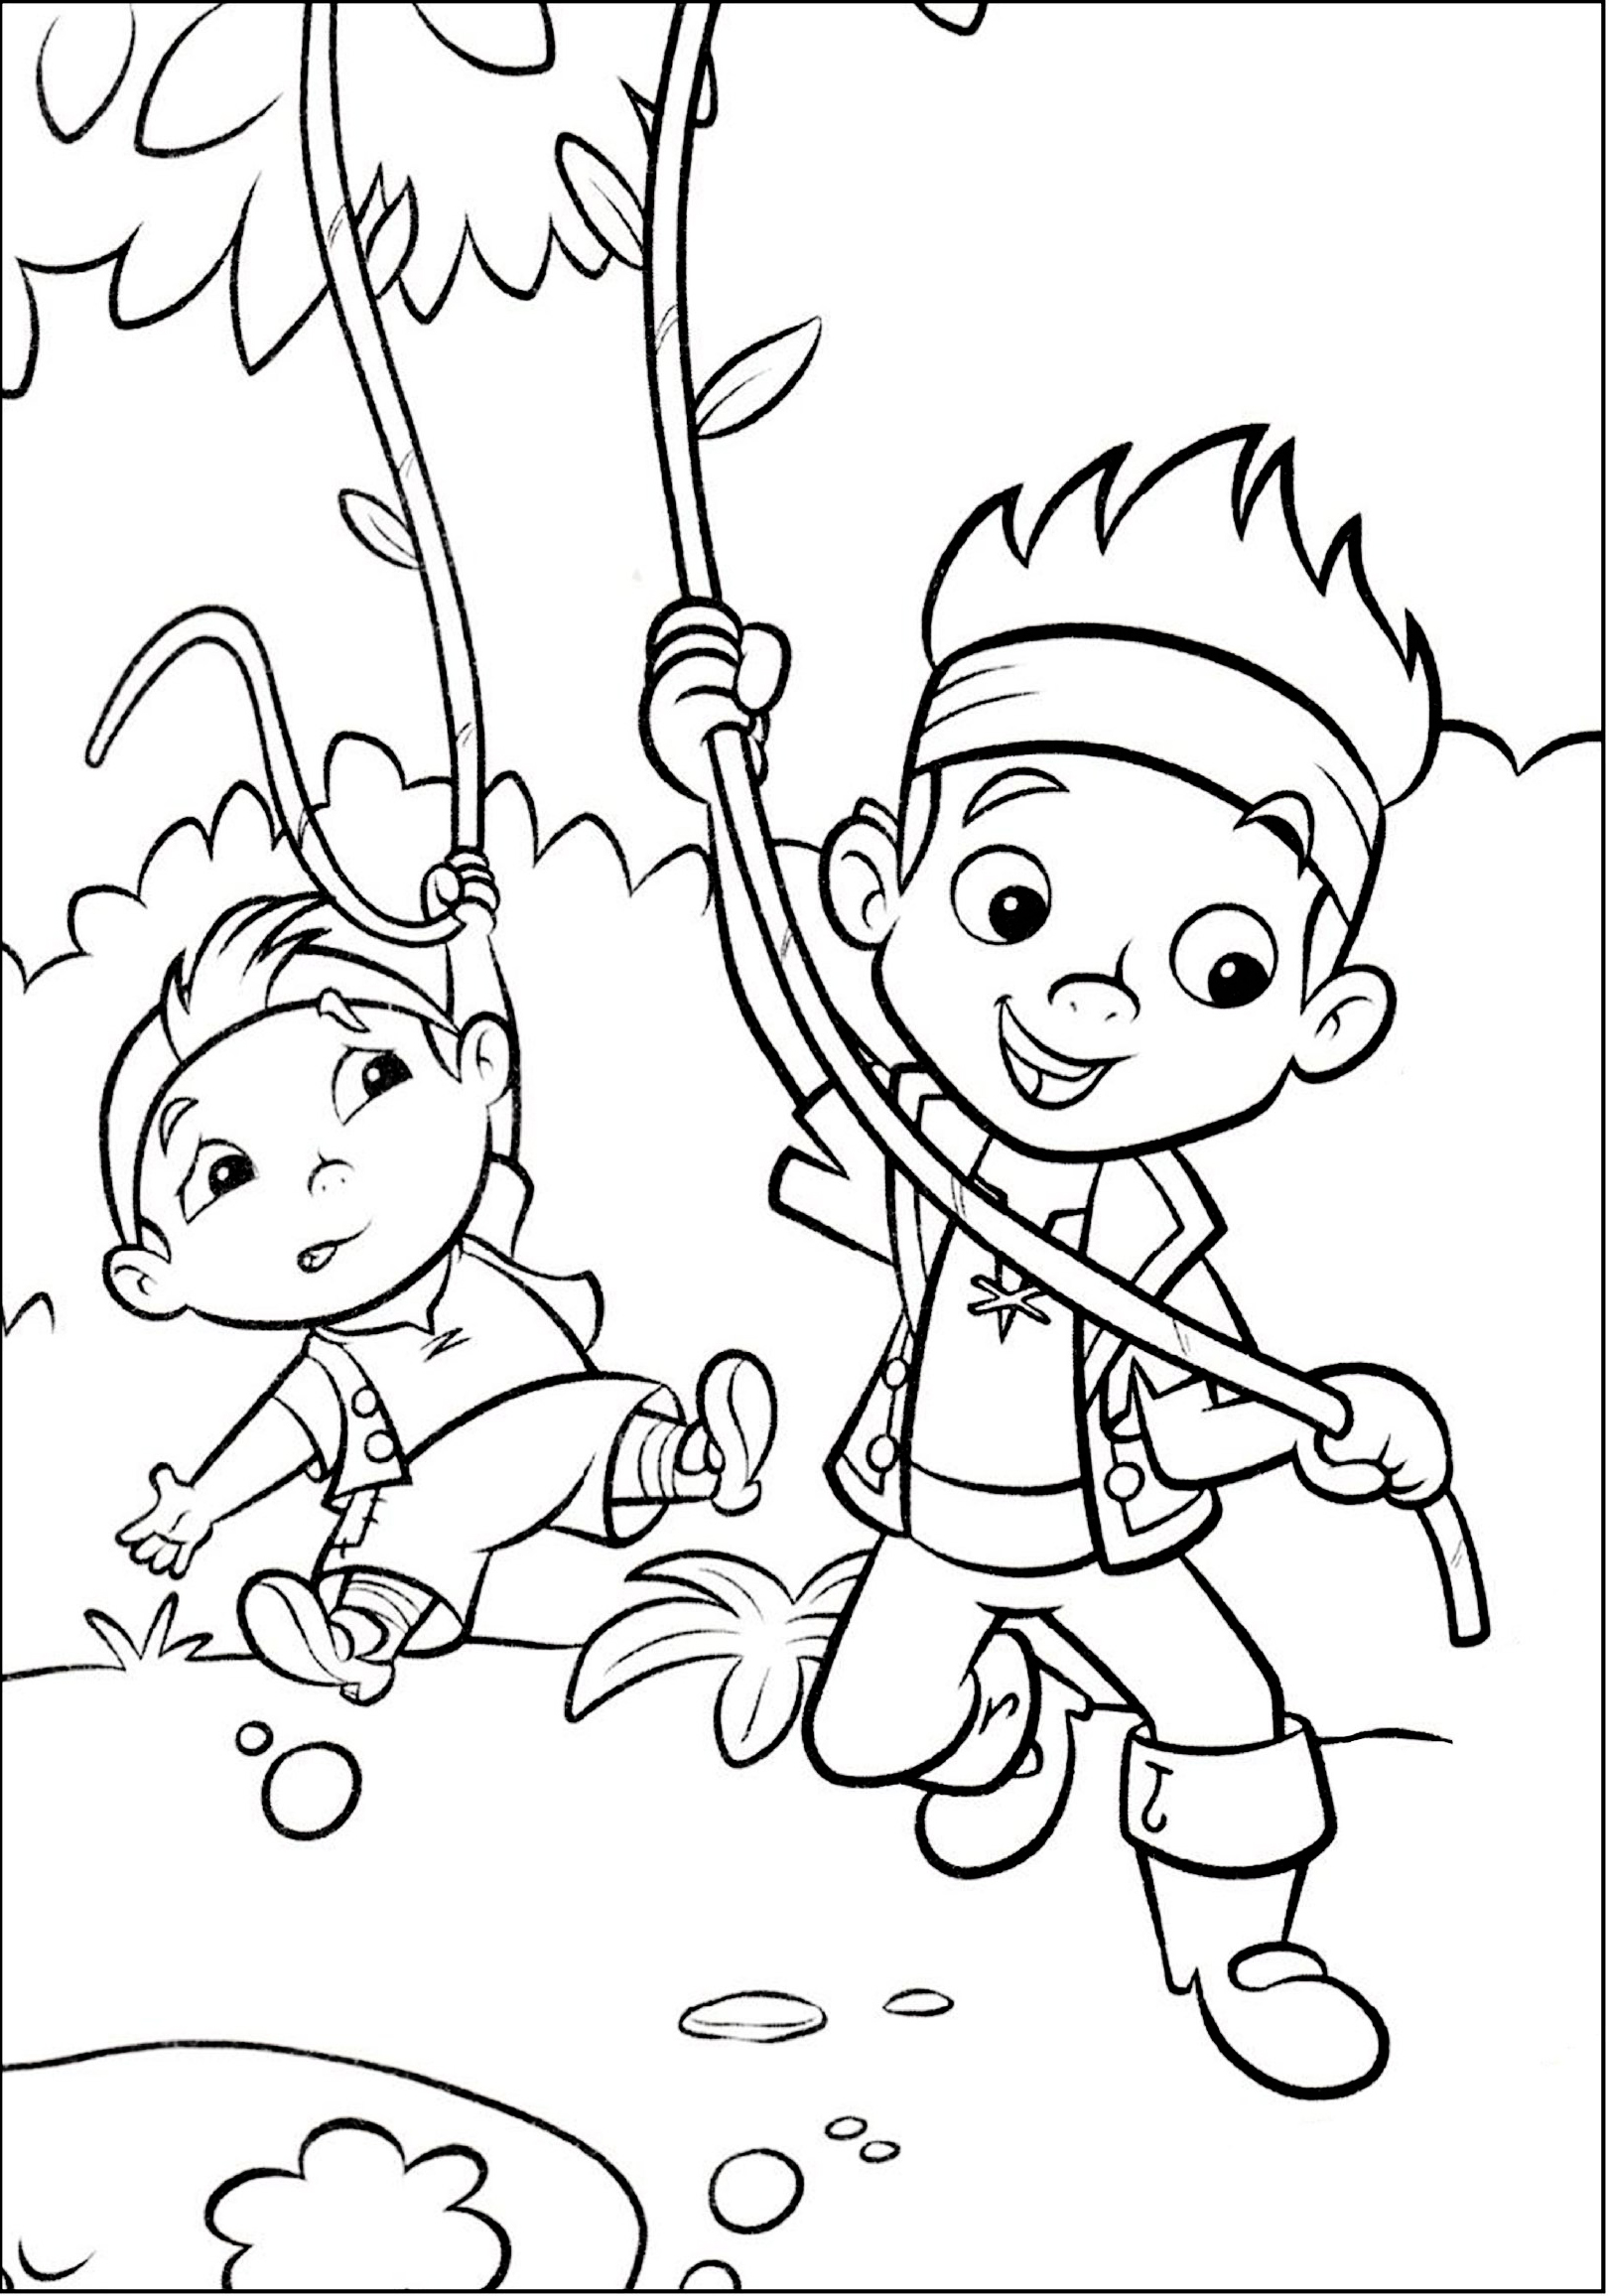 Coloring page Jake and the Never Land Pirates Pirates in the Jungle